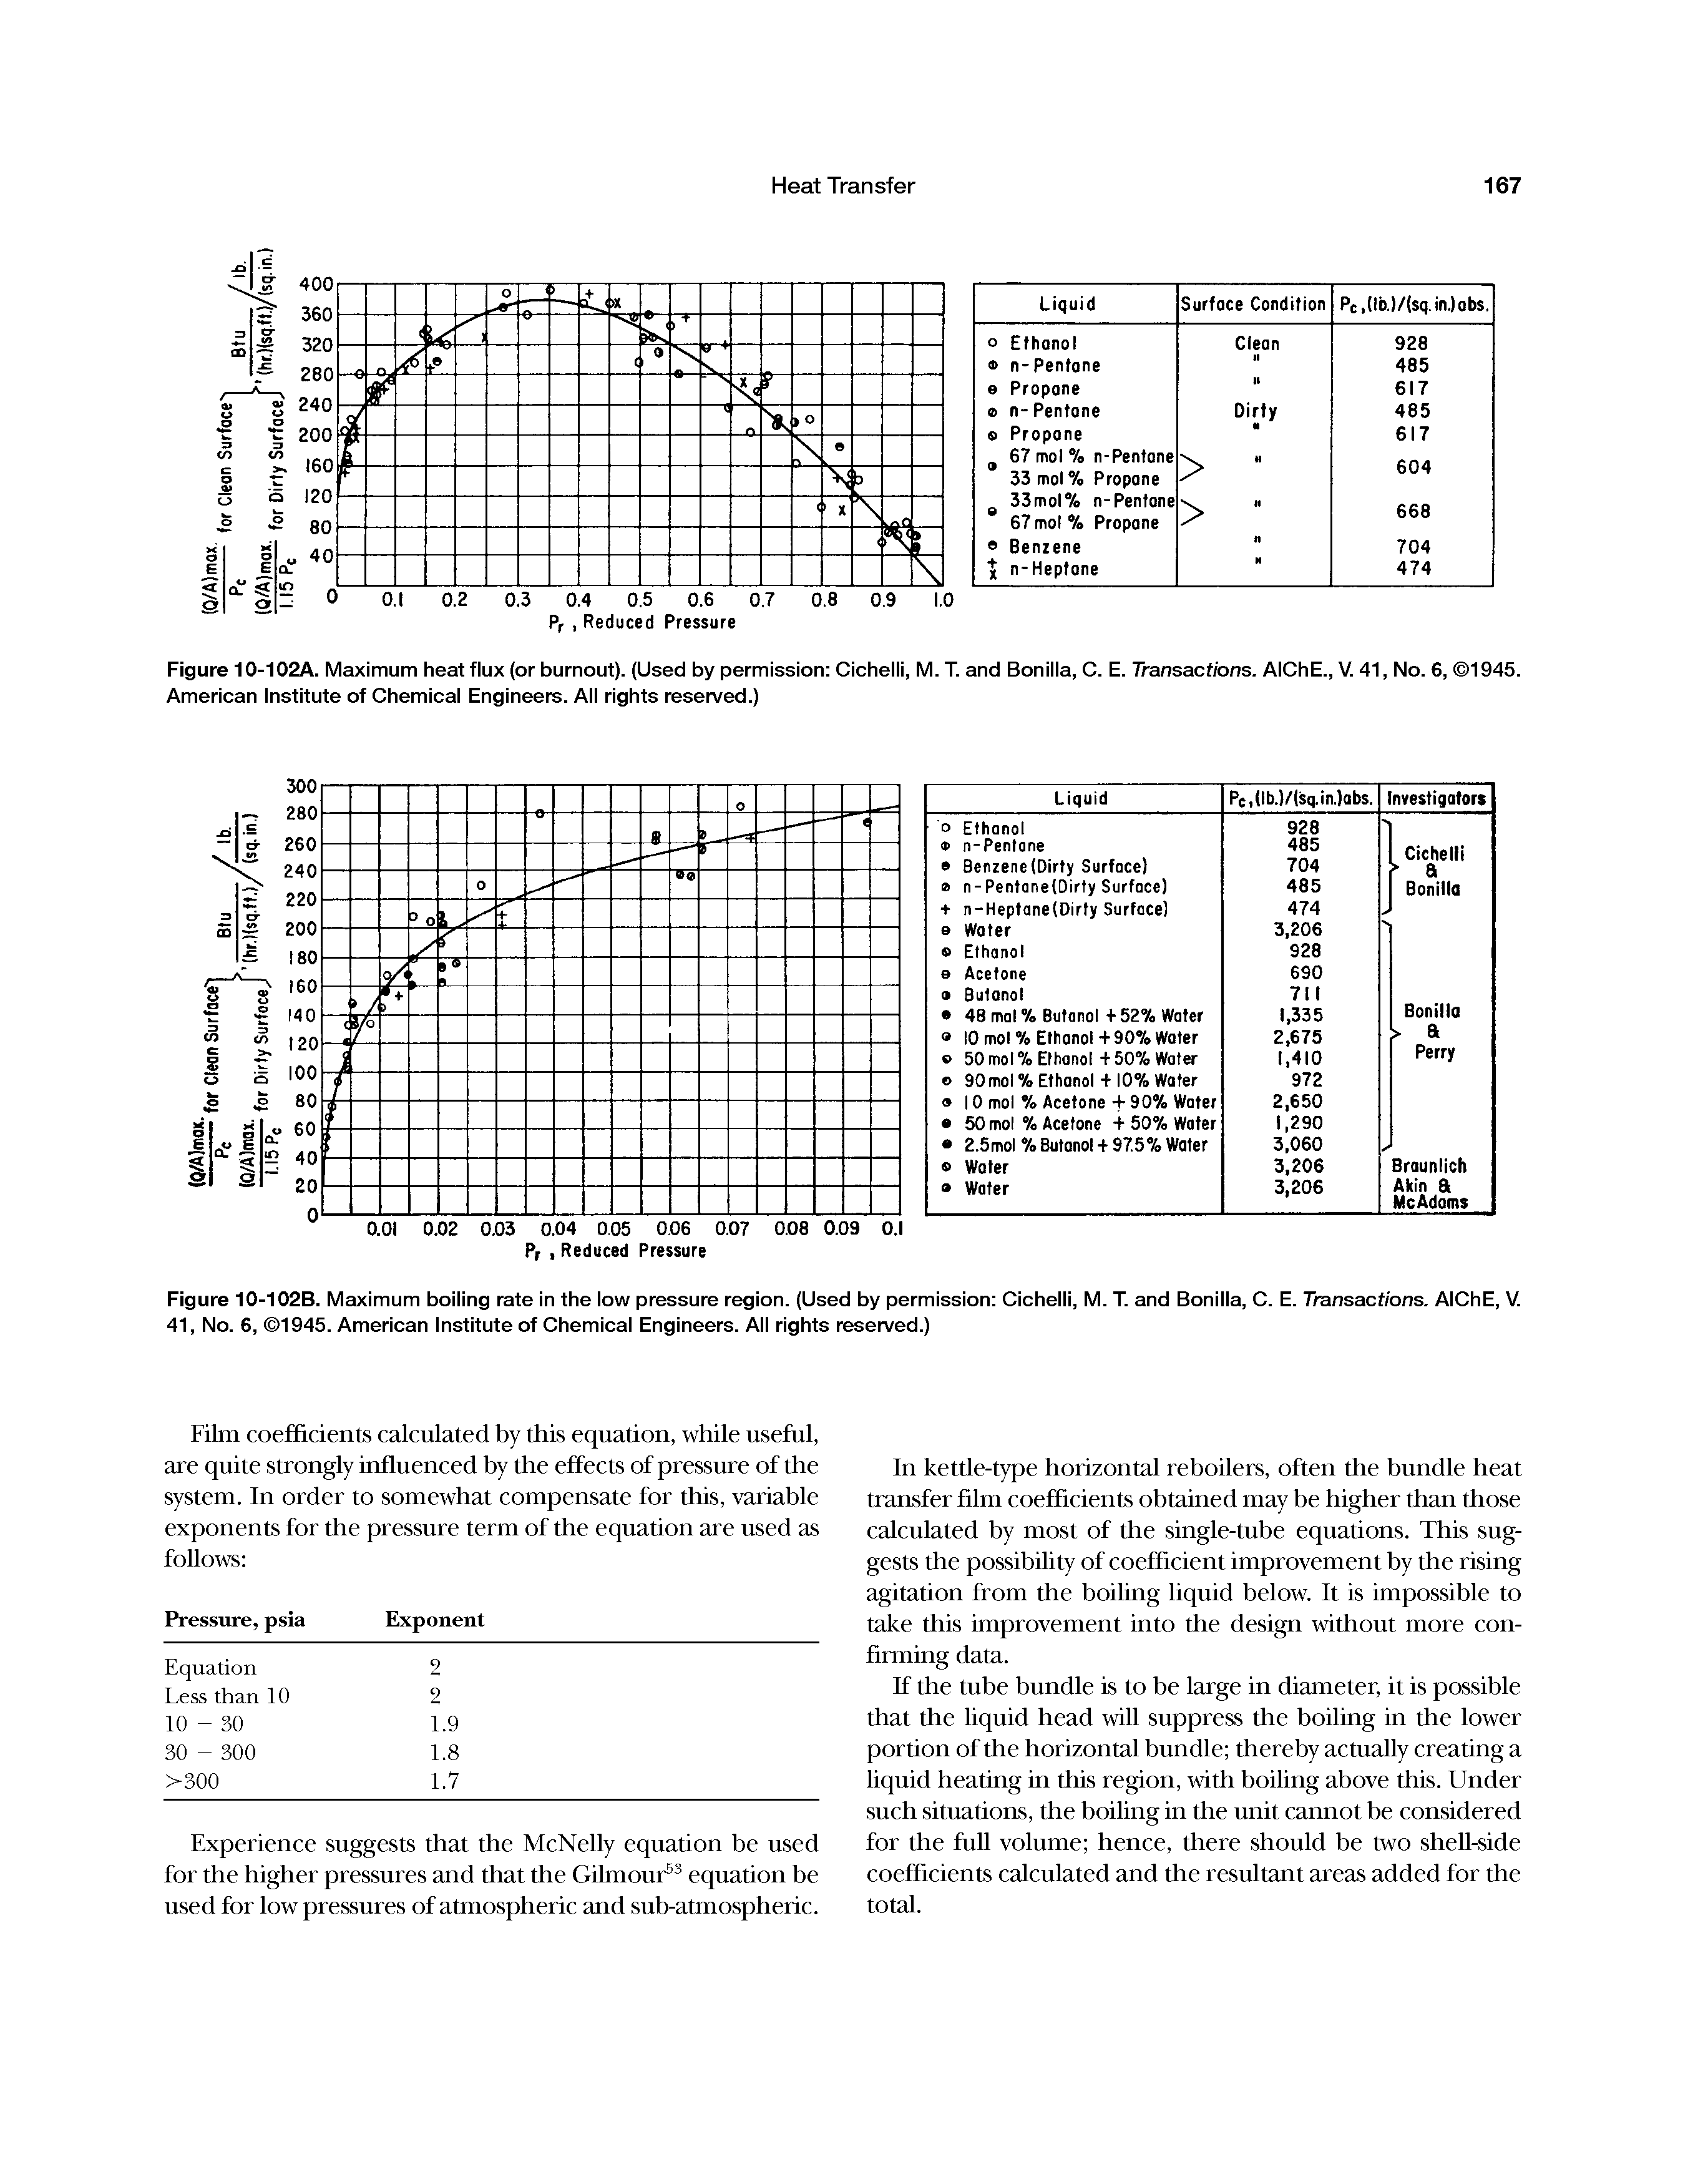 Figure 10-102A. Maximum heat flux (or burnout). (Used by permission Cichelli, M. T. and Bonilla, C. E. Transactions. AlChE., V. 41, No. 6, 1945. American Institute of Chemical Engineers. All rights reserved.)...